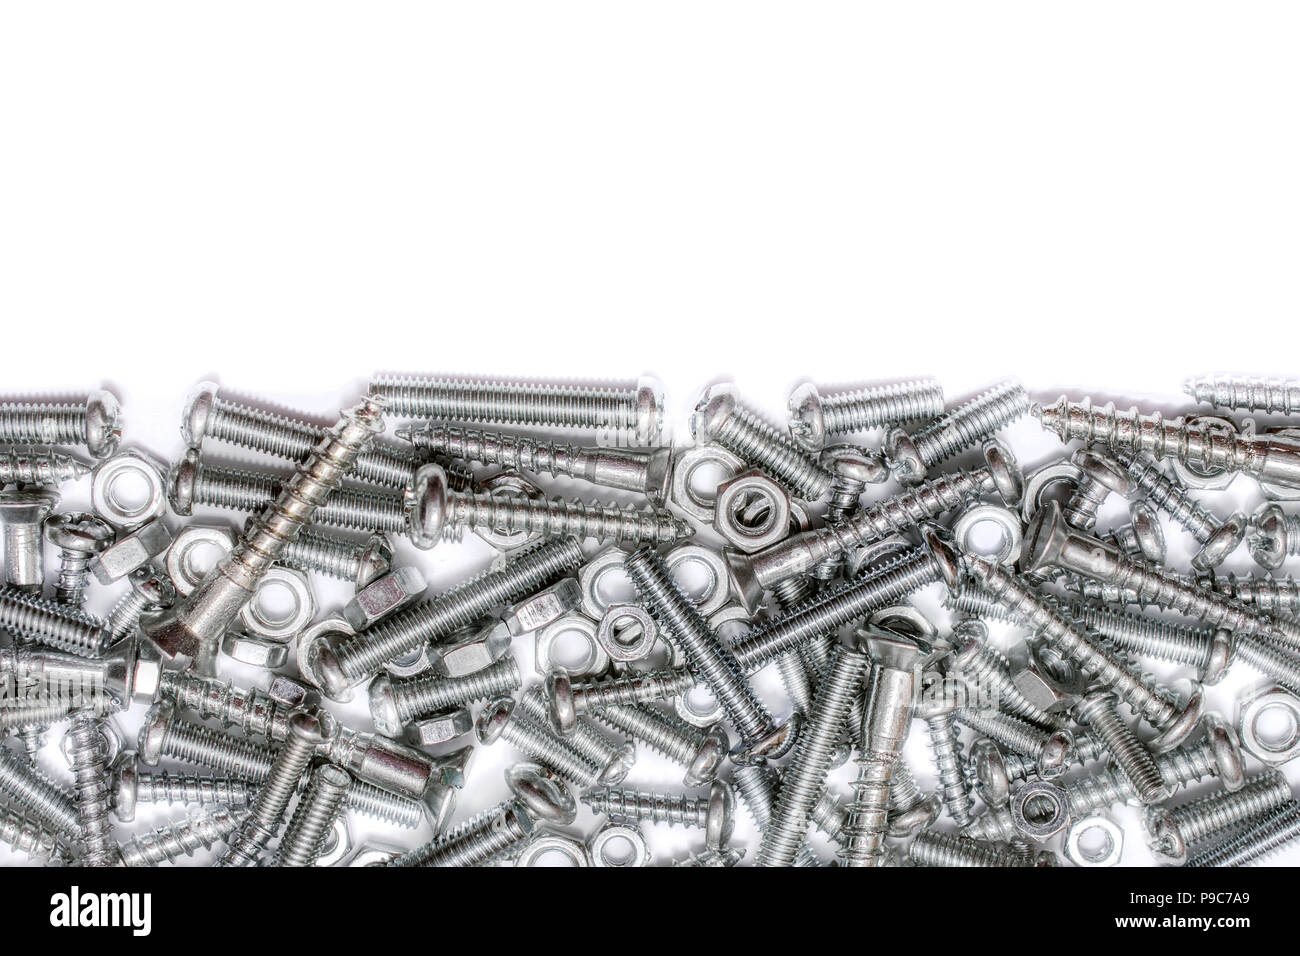 Big Collection Of Iron Screws, Wood Screws and Bolts With Free Space In The Upper Half Stock Photo